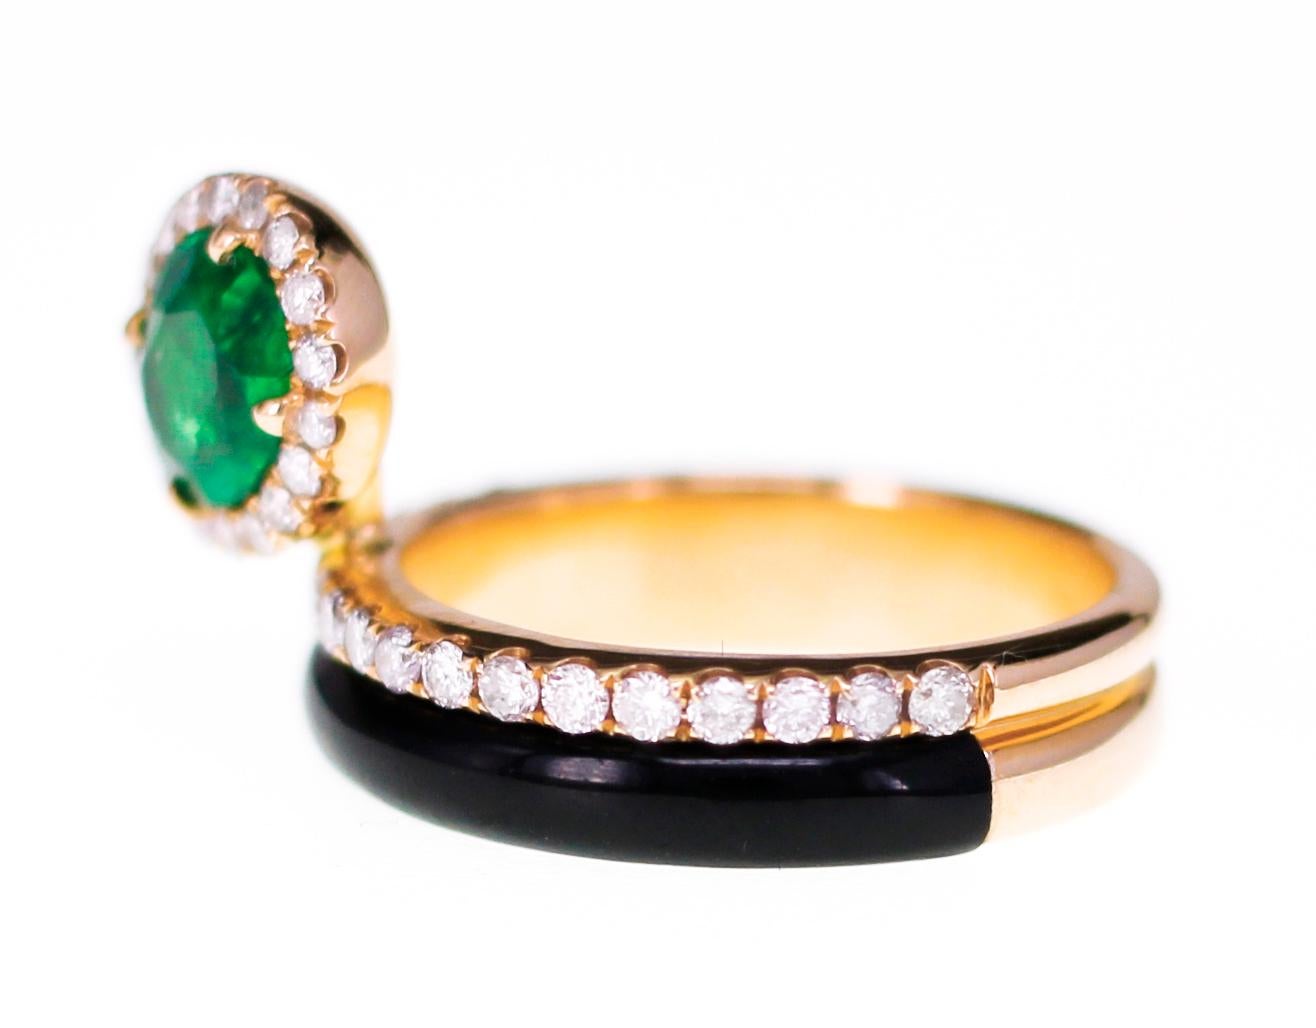 Oval Cut Art Deco Style Vivid Green Emerald Ring with Natural Pink Diamond